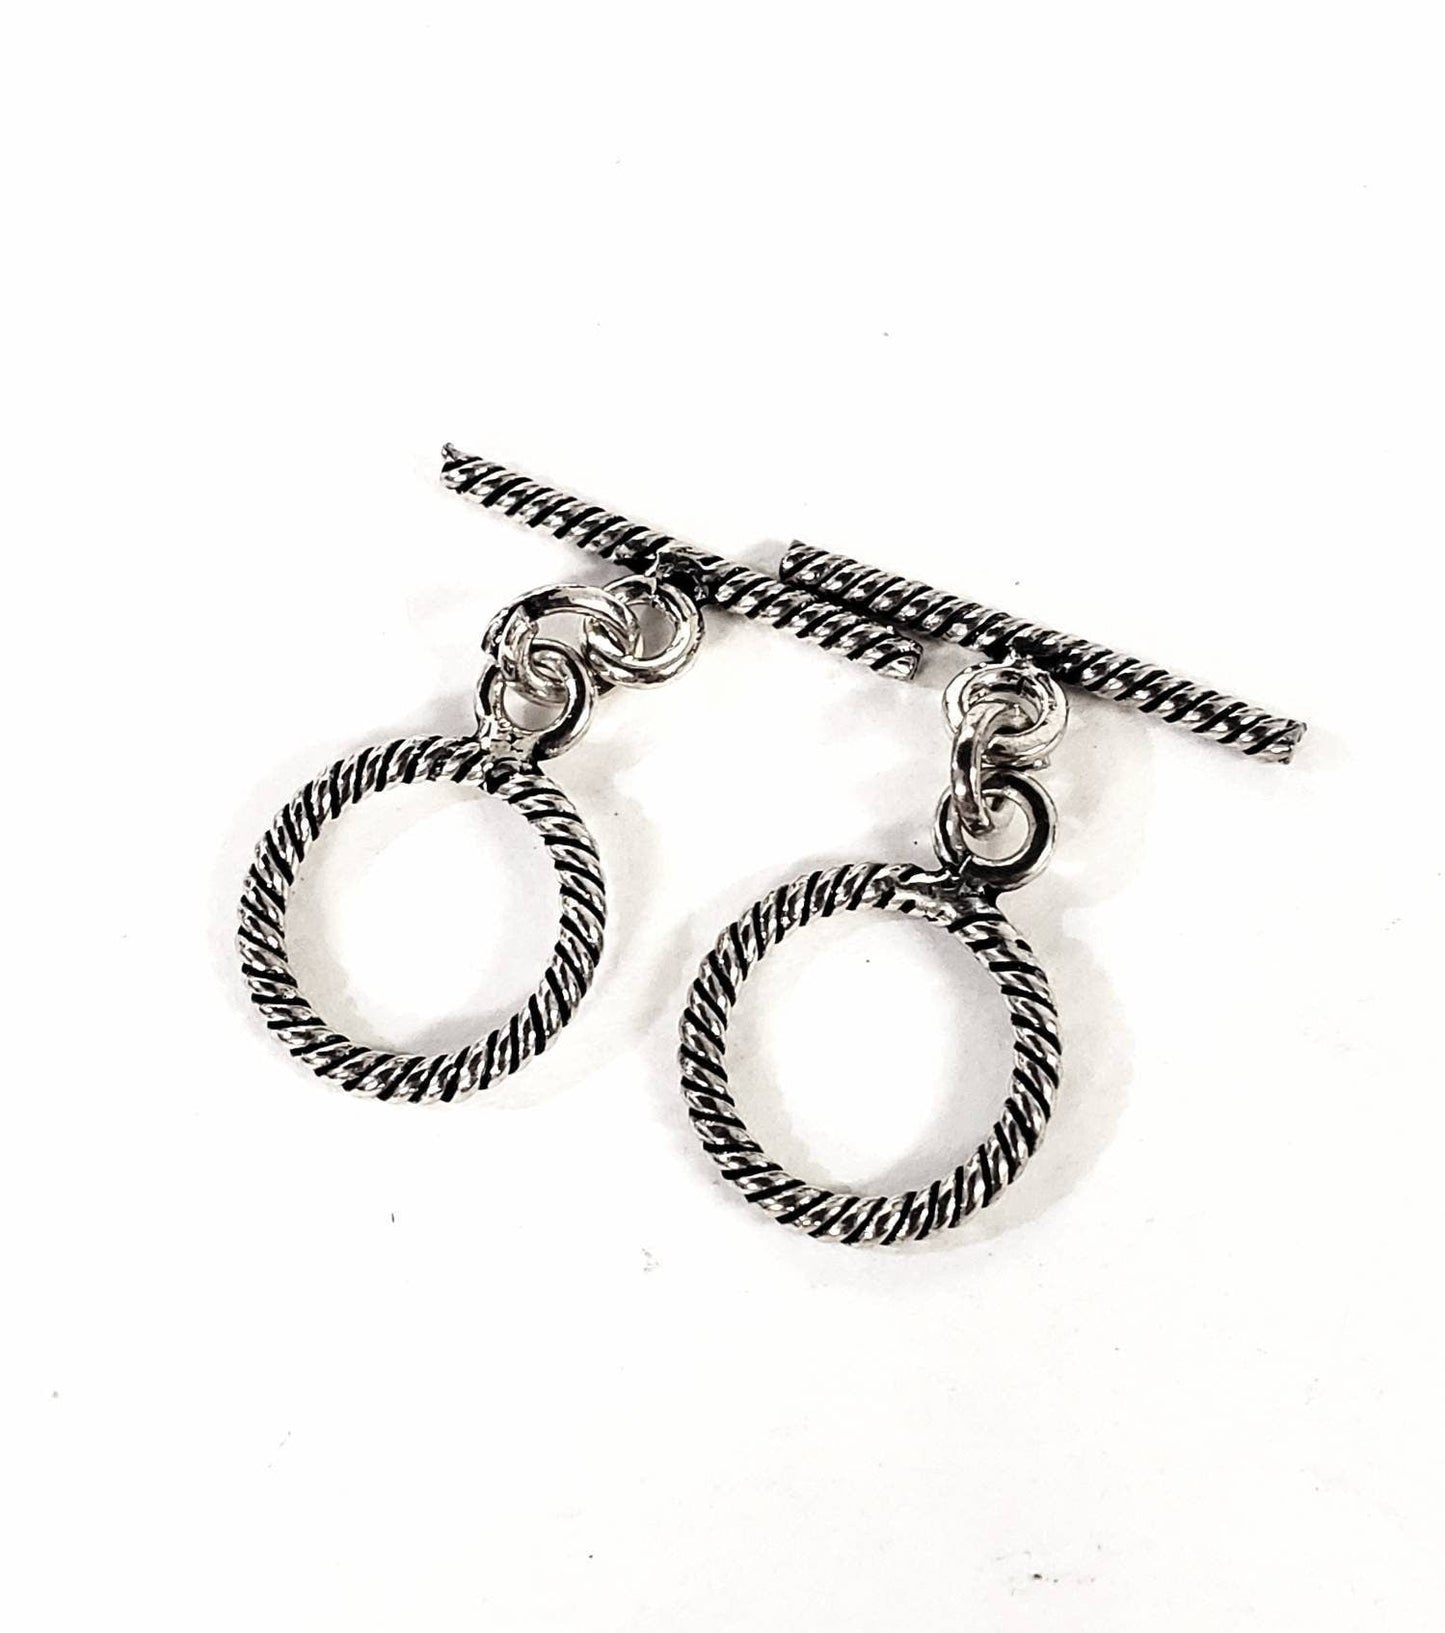 2 sets 925 Sterling Silver Bali 14mm Rope toggle clasp, vintage Handmade jewelry making toggle Clasp